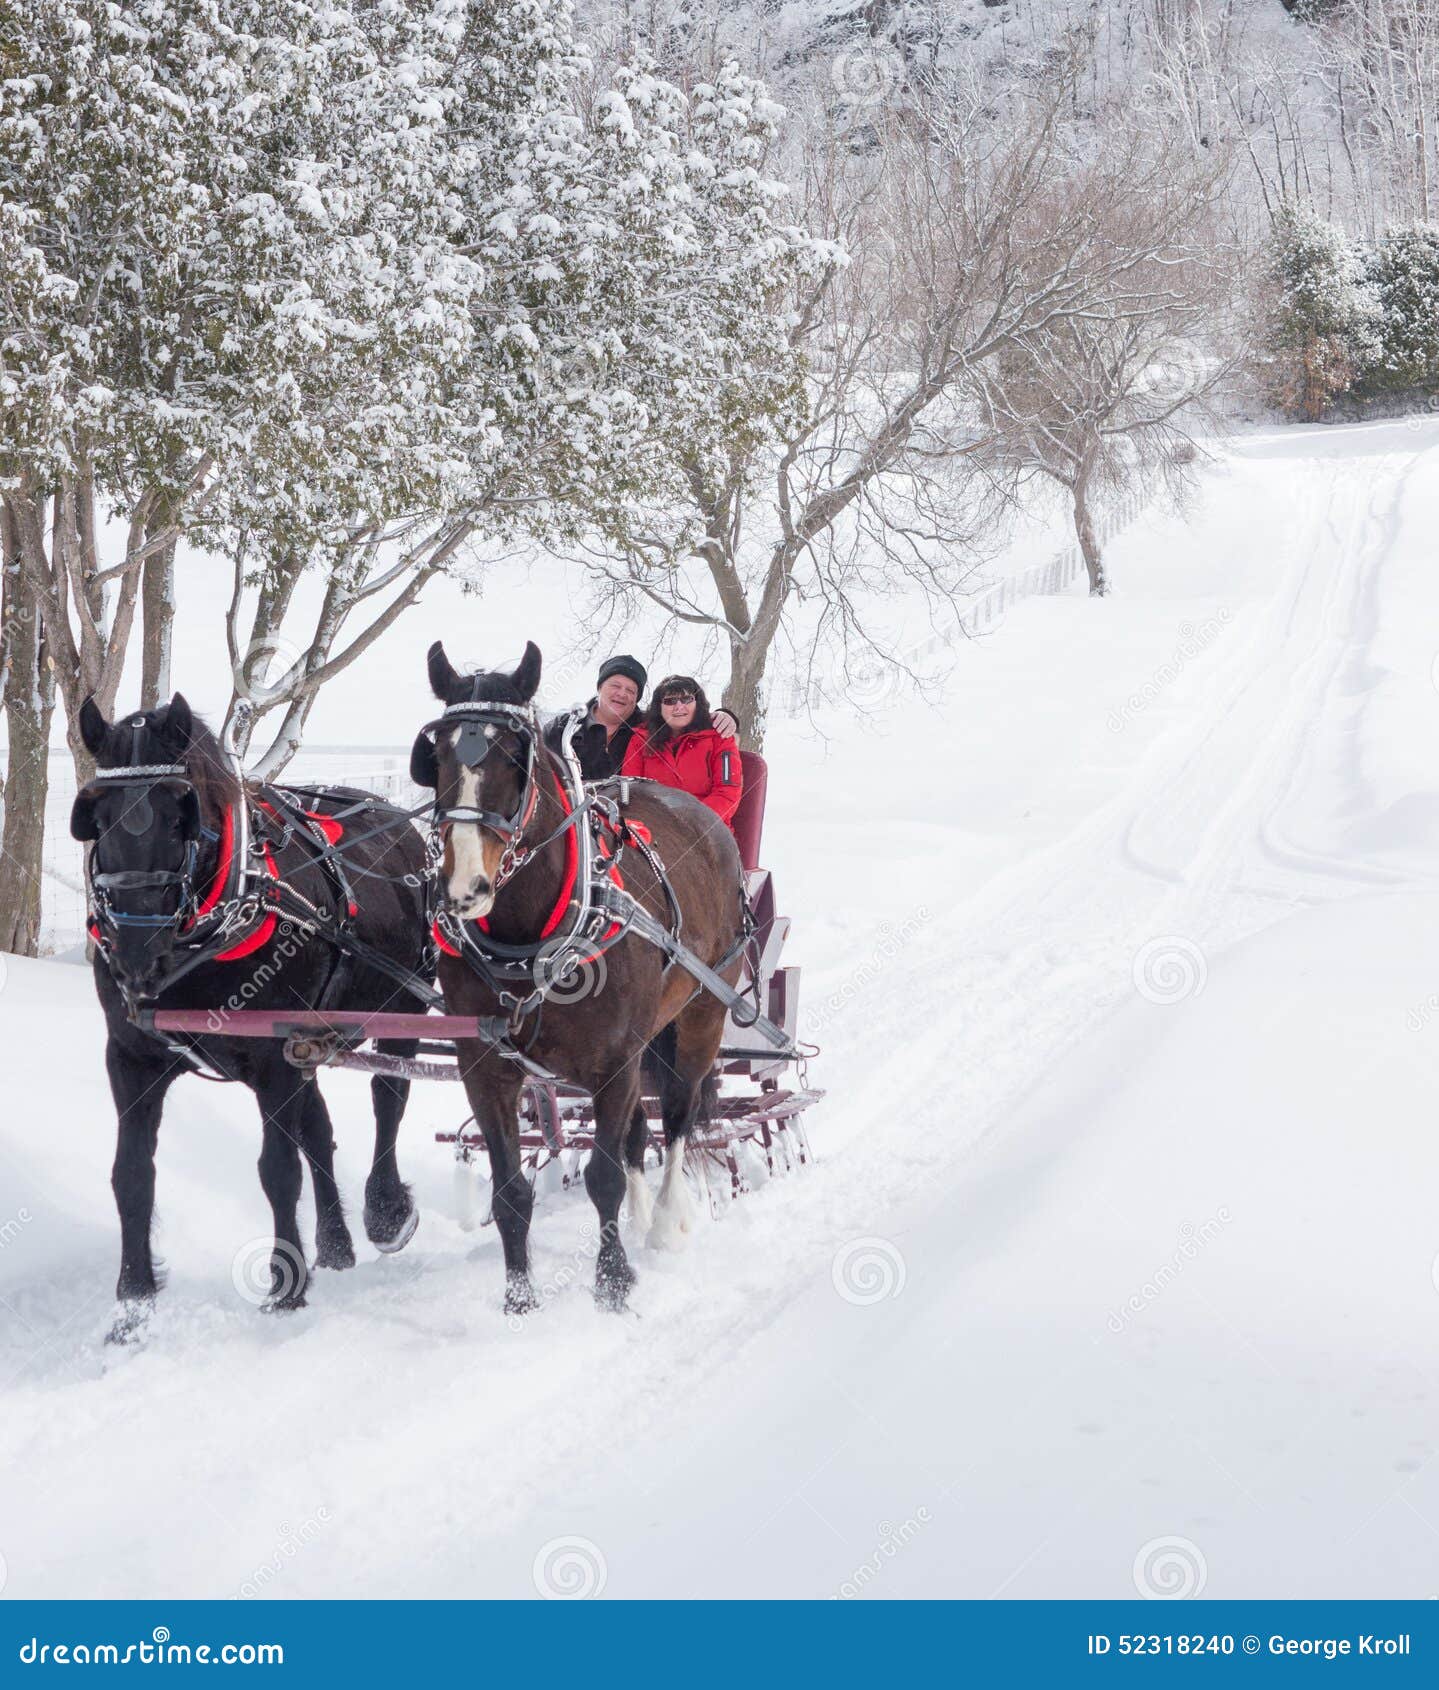 an older couple on a sleigh ride